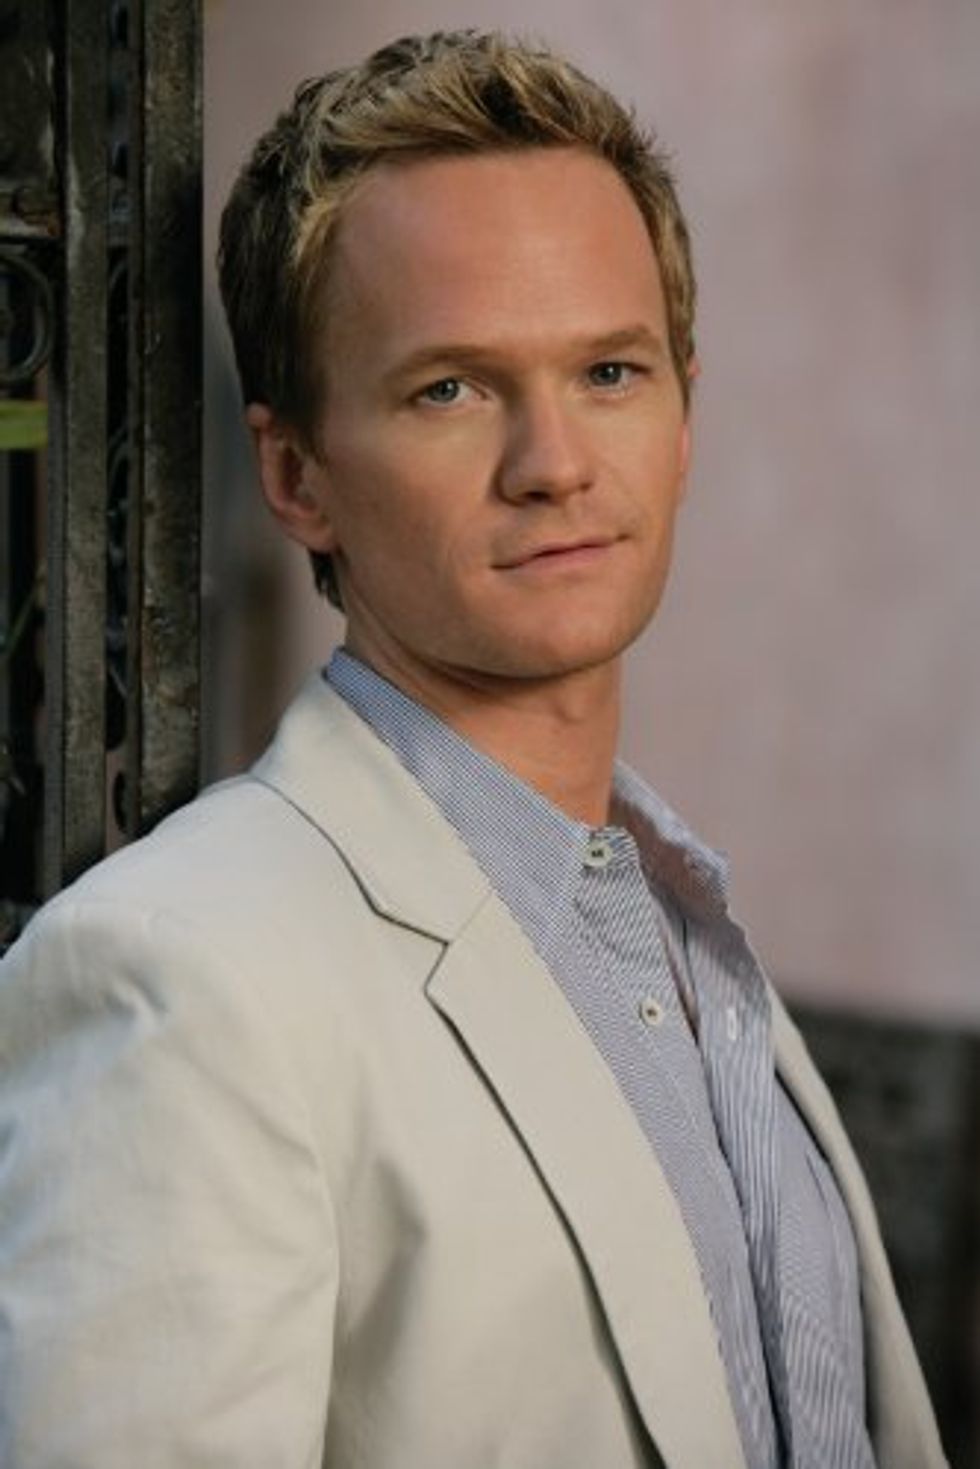 Neil Patrick Harris in Town For Sketchfest This Weekend